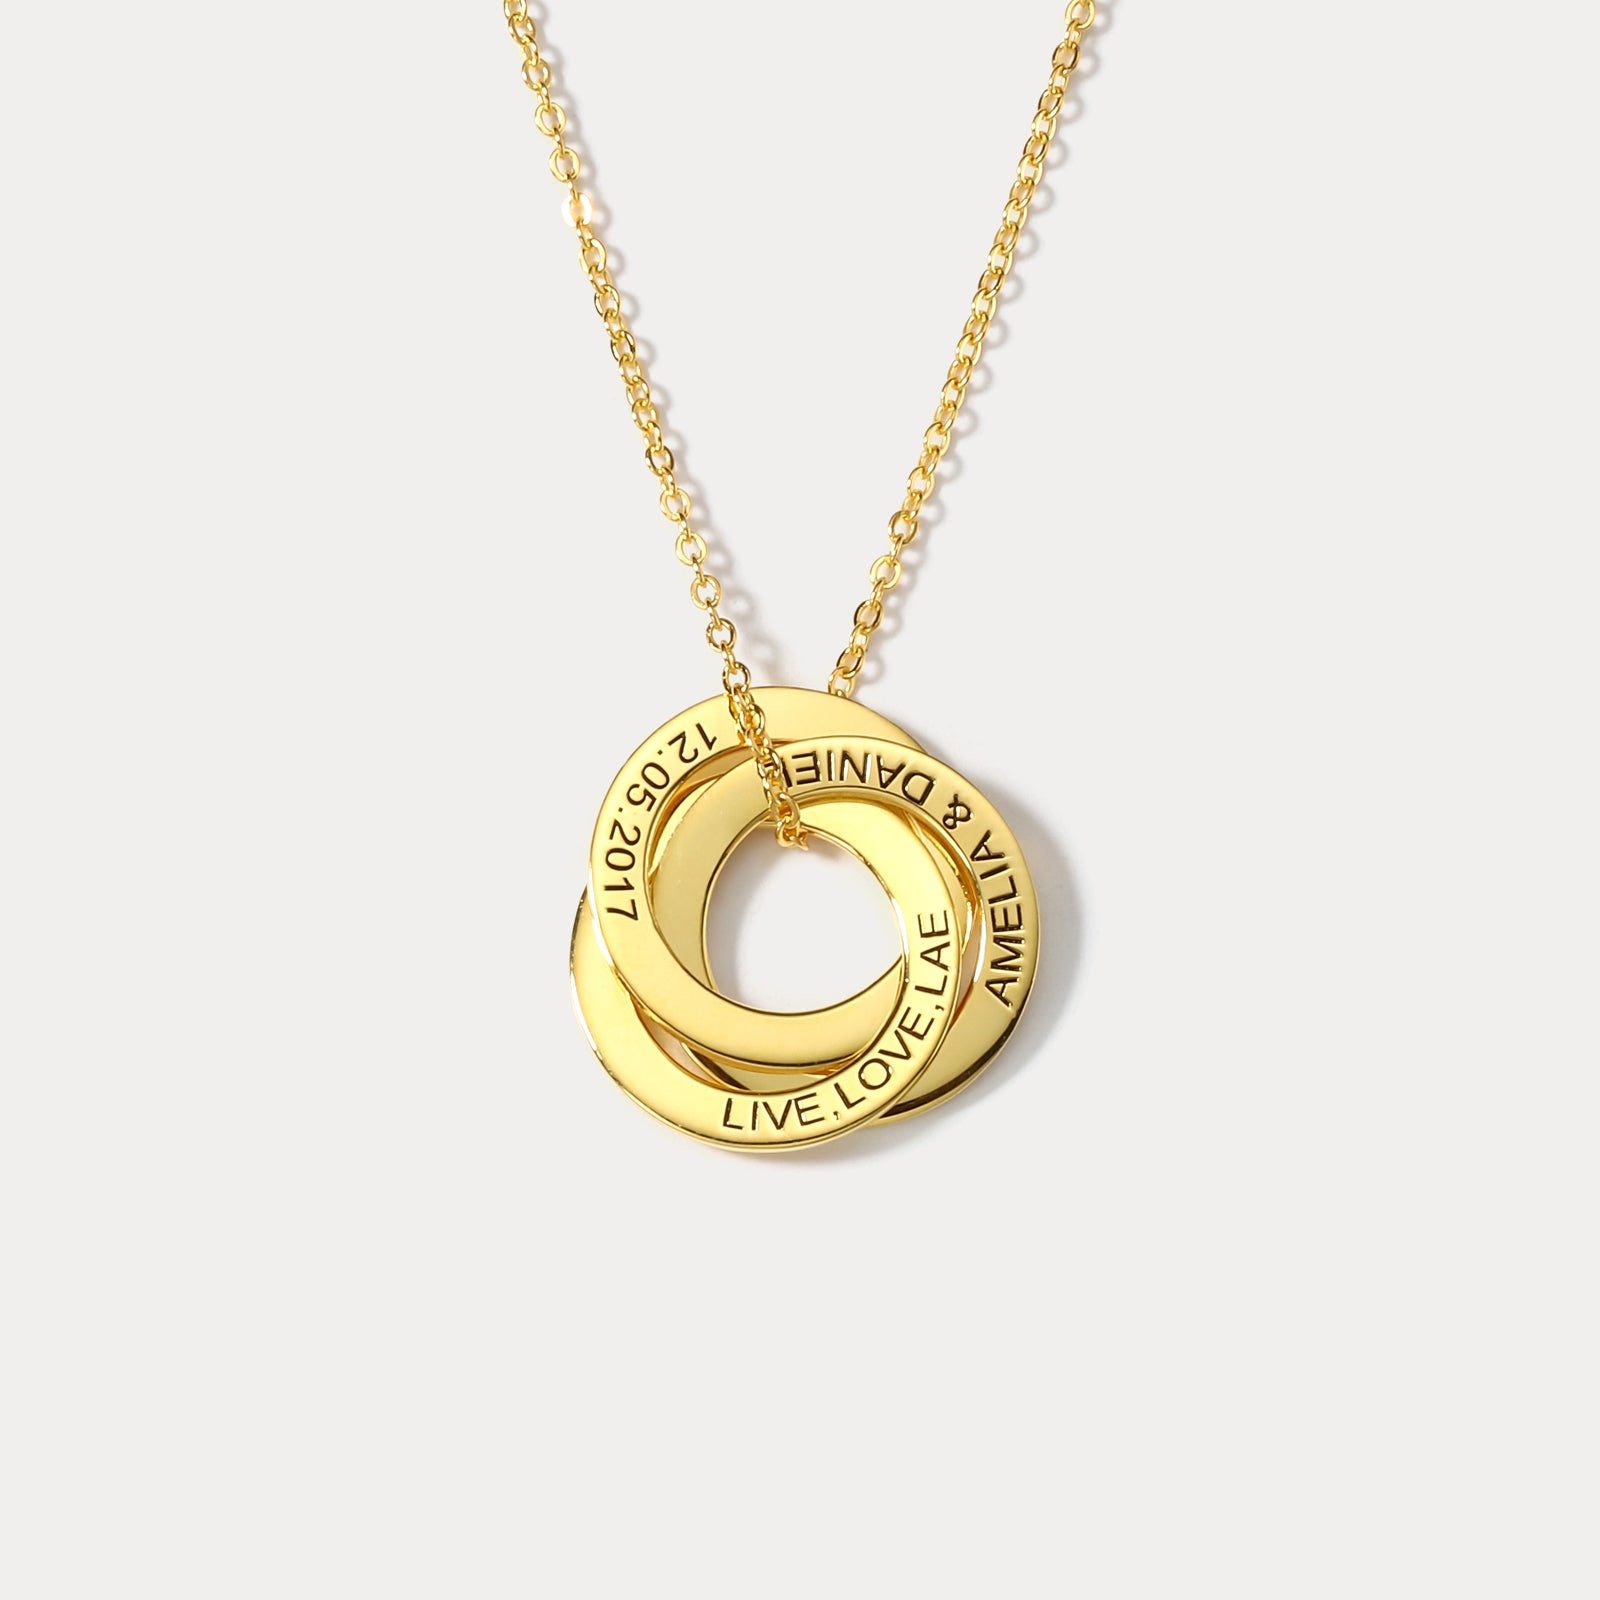 Selenichast Interlink Circles Name Necklace